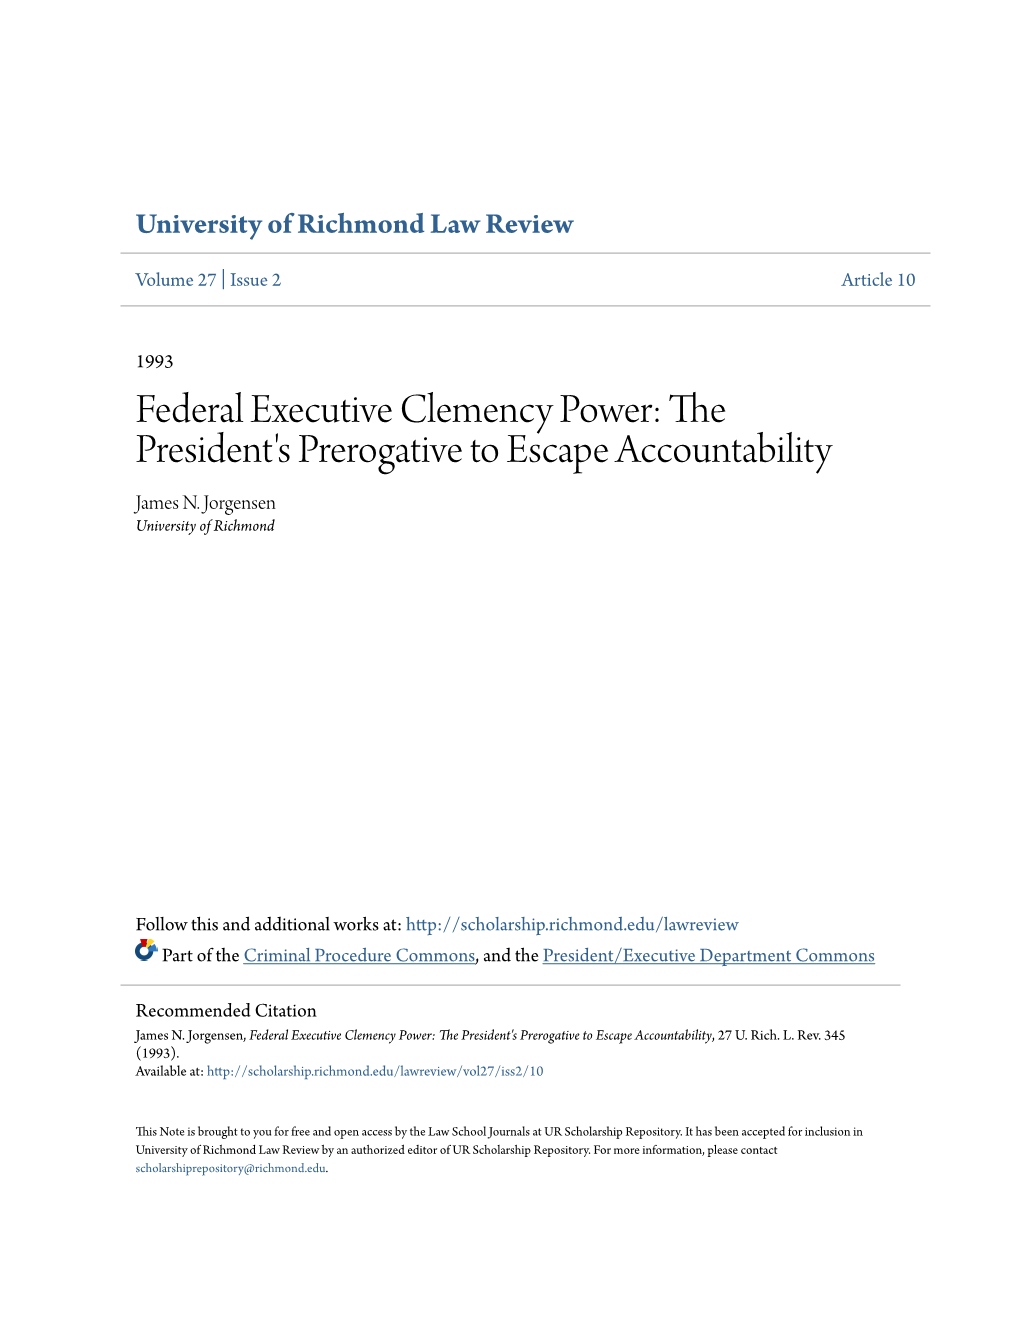 Federal Executive Clemency Power: the President's Prerogative to Escape Accountability James N